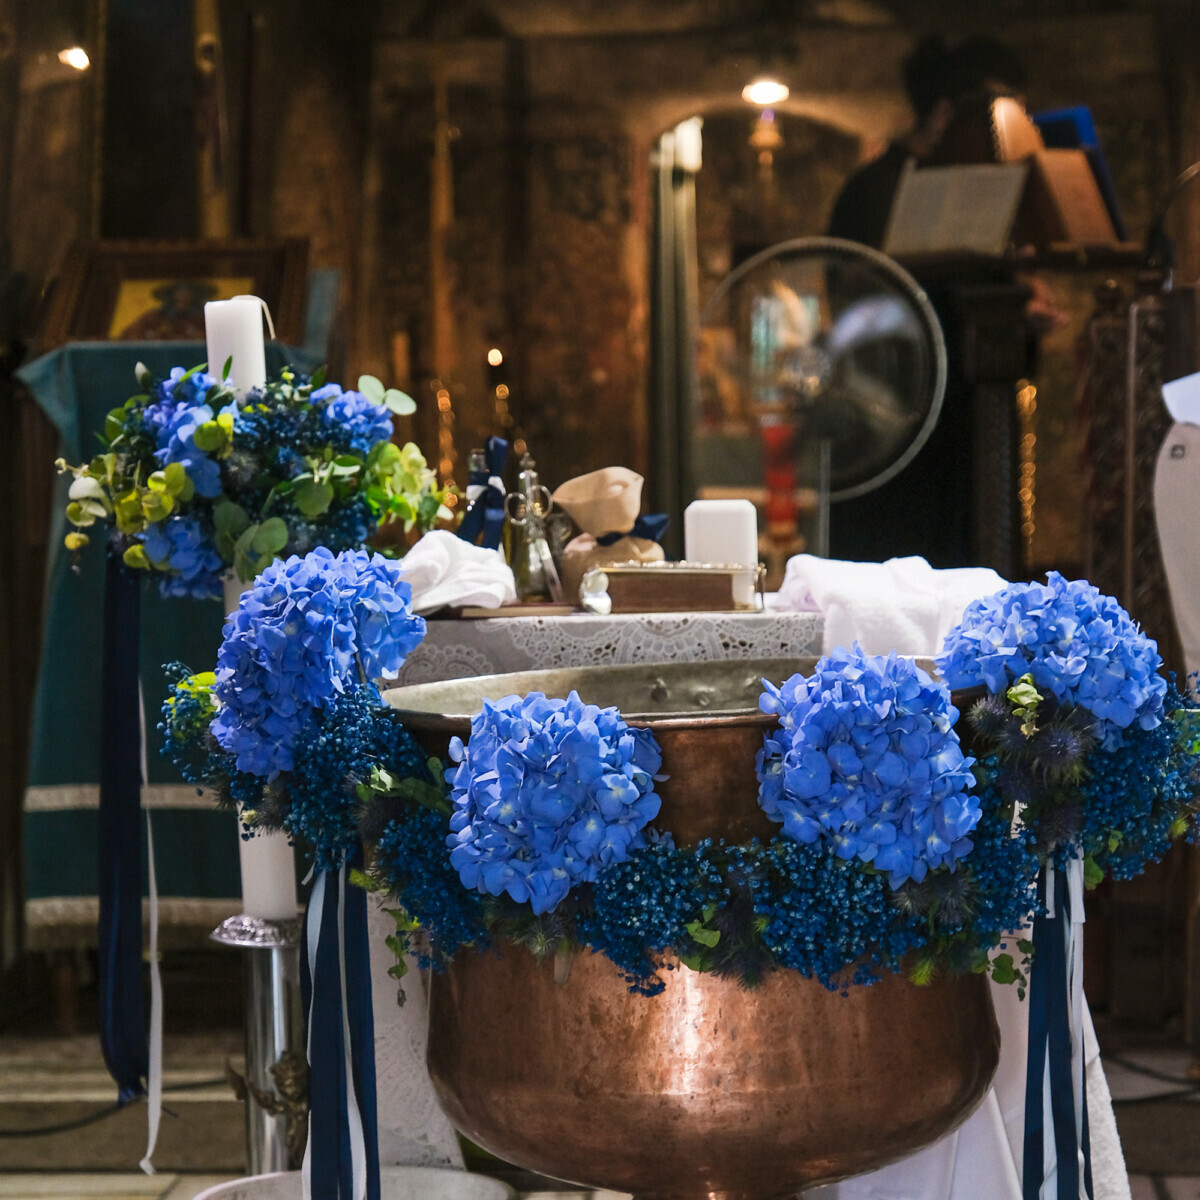 Baptistery Decoration for a Baptism in Greece for a boy with garland of blue hydrangeas and blue gypsophila.